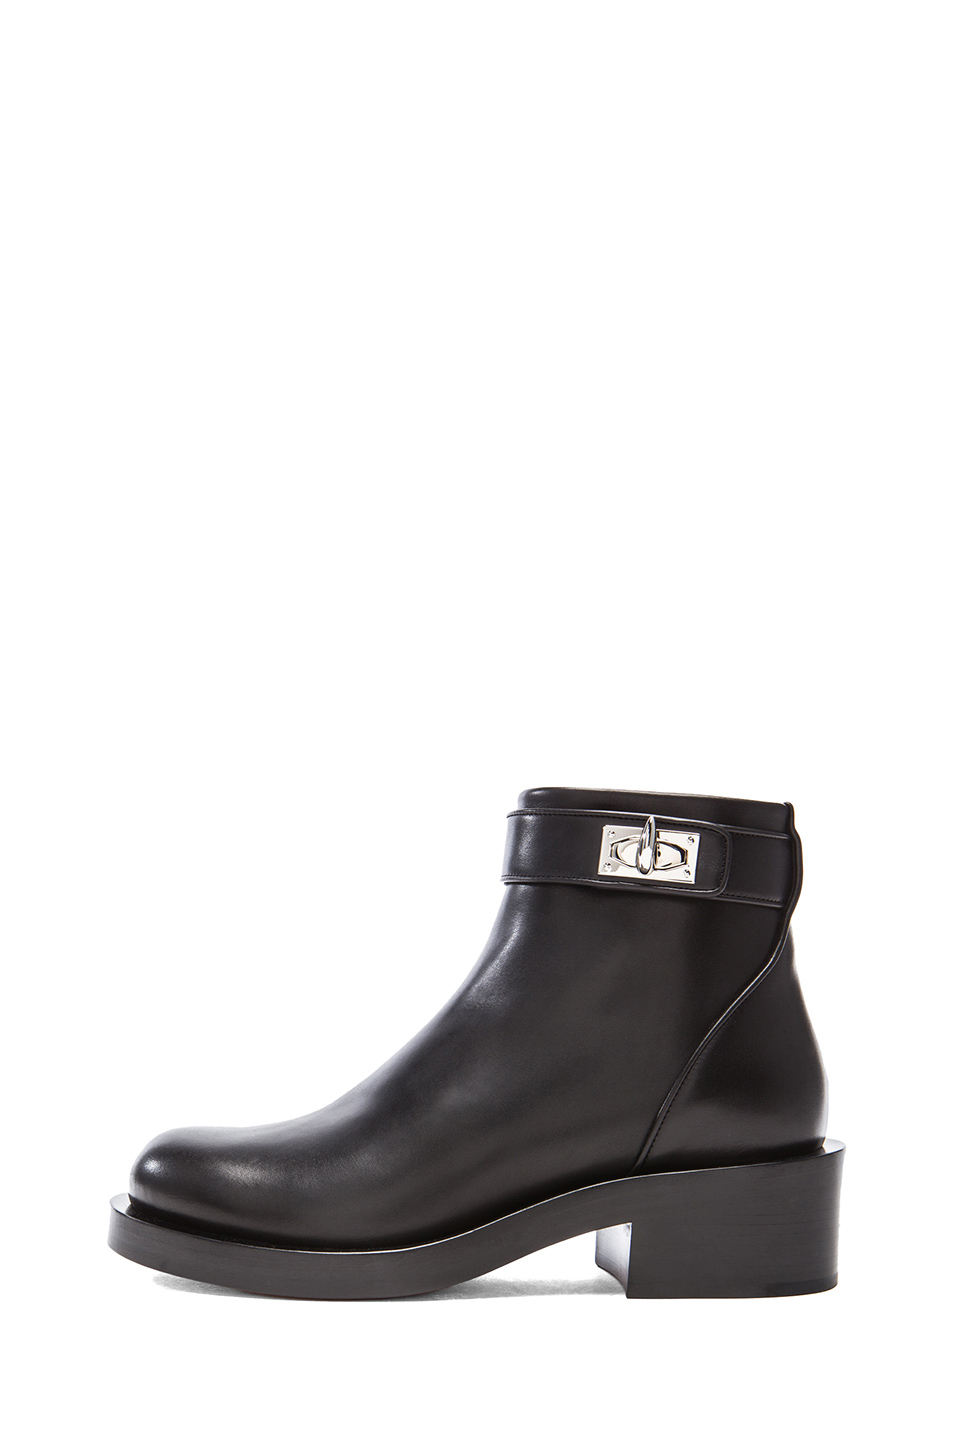 Givenchy Silvia Shark Lock Ankle Leather Boots in Black | Lyst